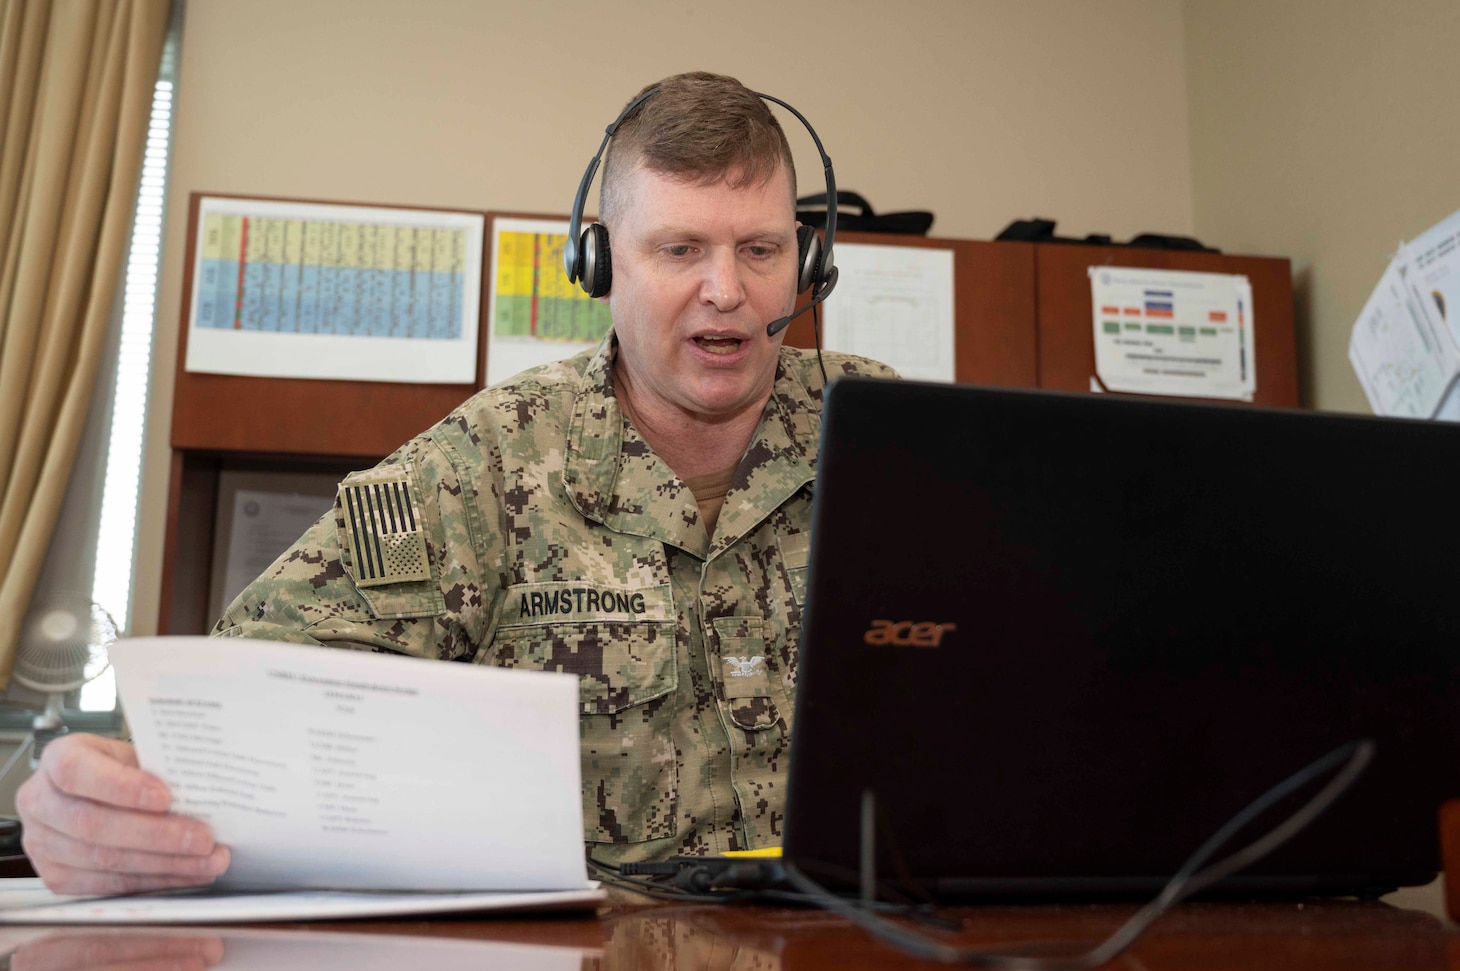 The Chief of Staff for Commander, Navy Reserve Forces Command (CNRFC), Capt. Errin Armstrong, addresses Sailors during a virtual extremism stand-down.